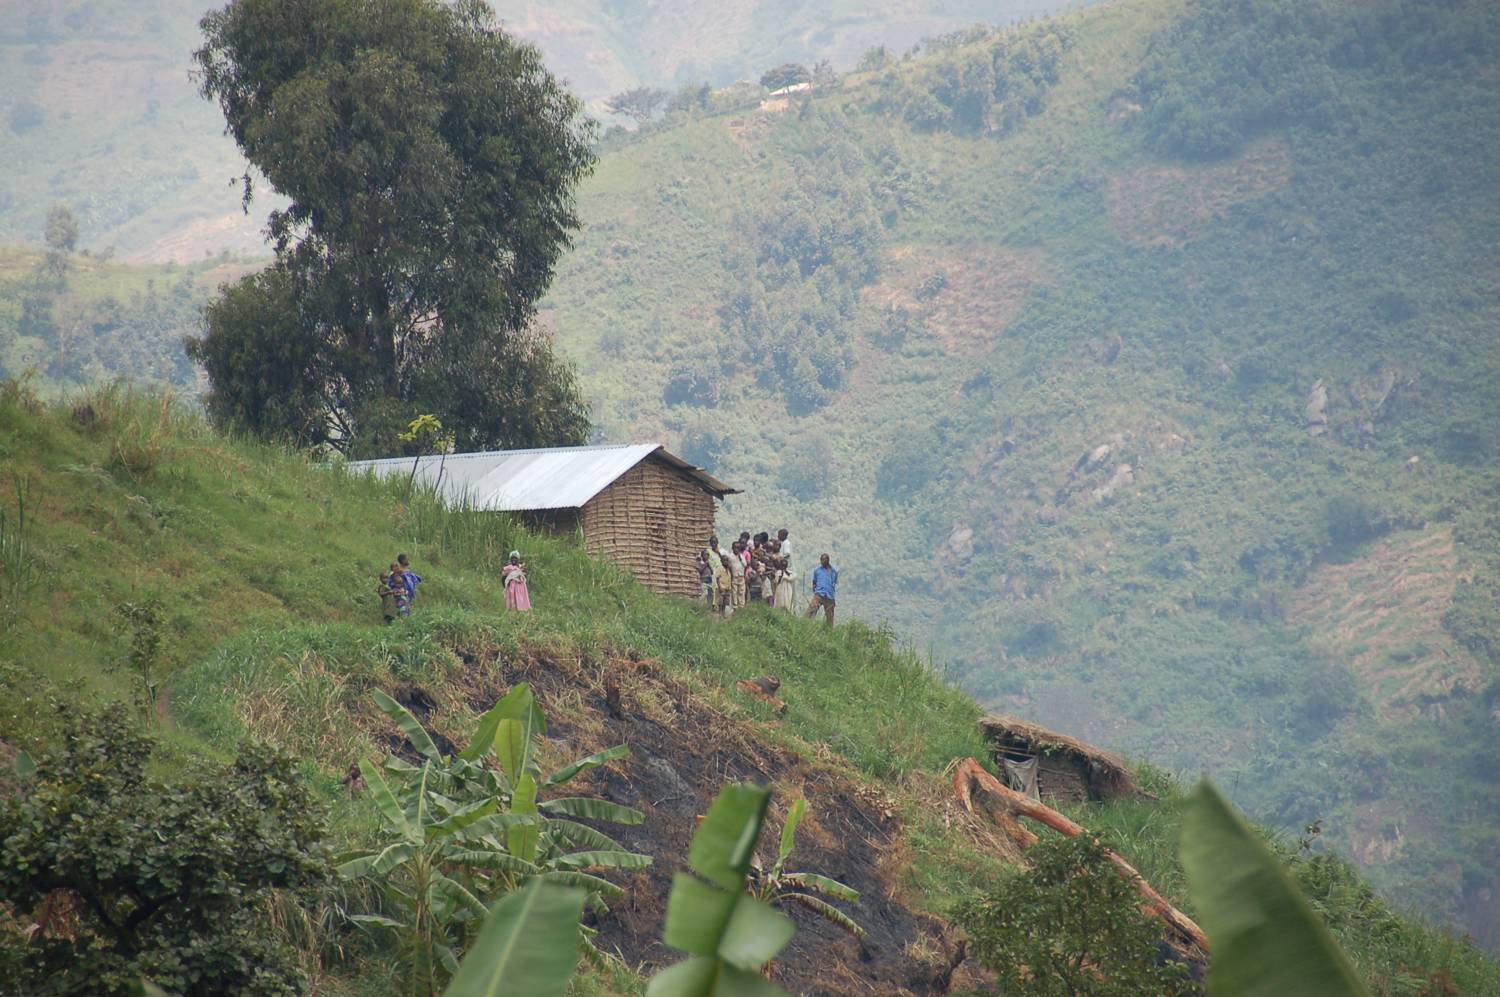 Dwelling in the mountains of the Ruwenzori Range, western Uganda. Photo: Dylan Walters / Encyclopædia Britannica / CC BY-SA 2.0